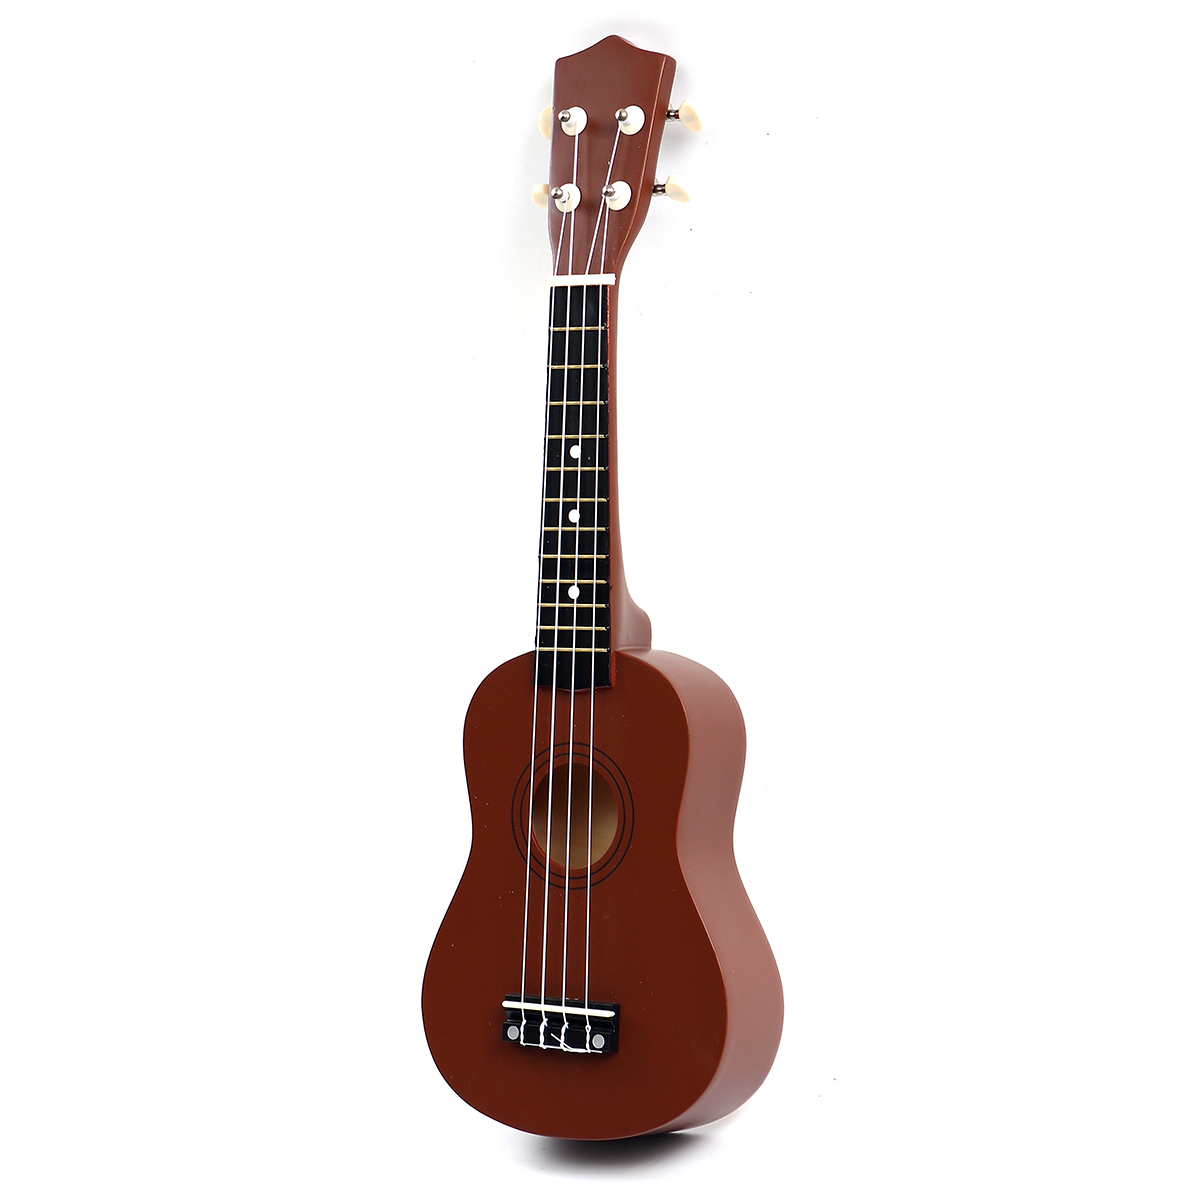 21 Inch 4 Strings Wood Hawaii Ukulele Musical Instrument with Gig Bag Strings Tuner Strap